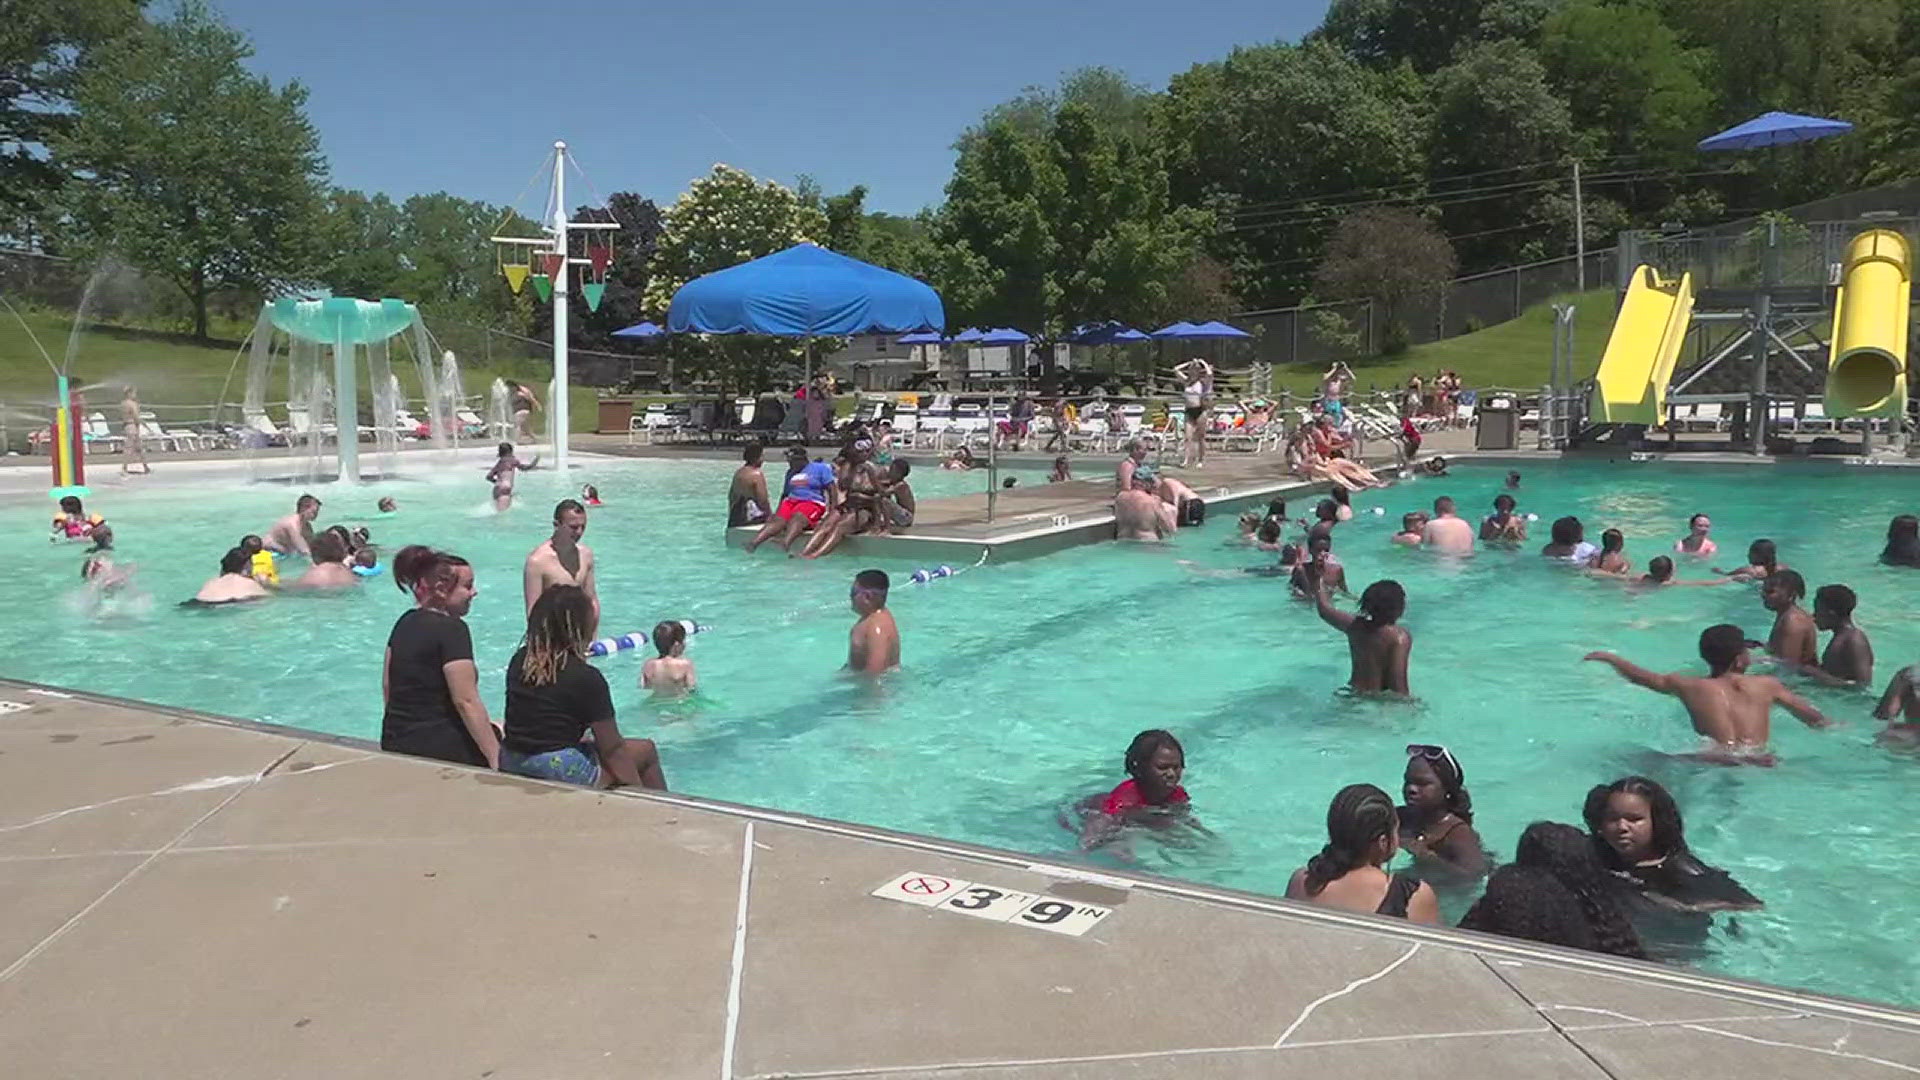 The water park features various improvements and new amenities that have been three years in the making, according to Moline Parks and Recreation.